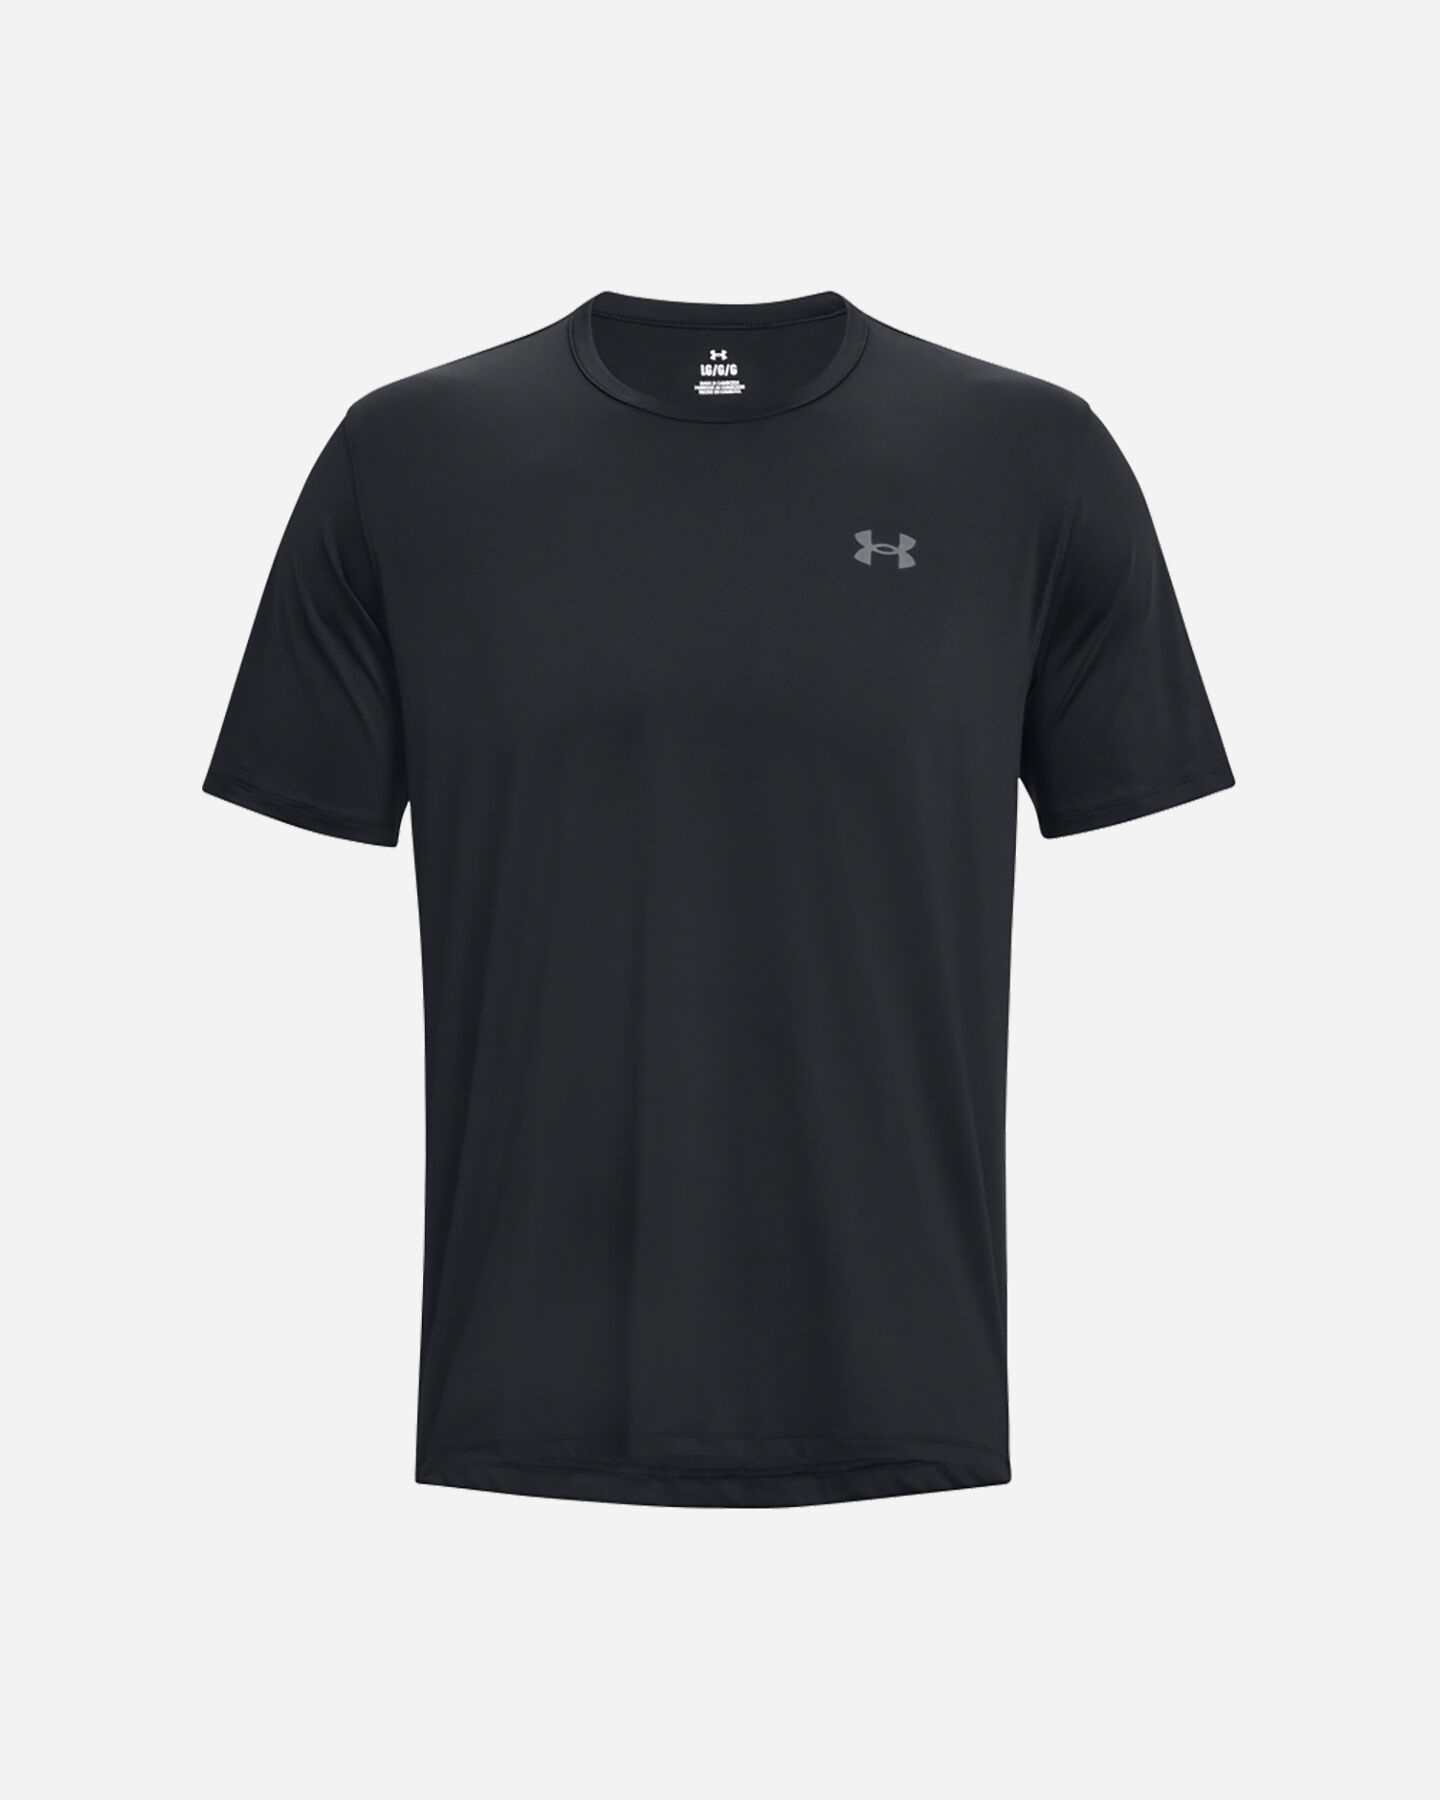  T-Shirt training UNDER ARMOUR MOTION M S5579940|0001|XS scatto 0